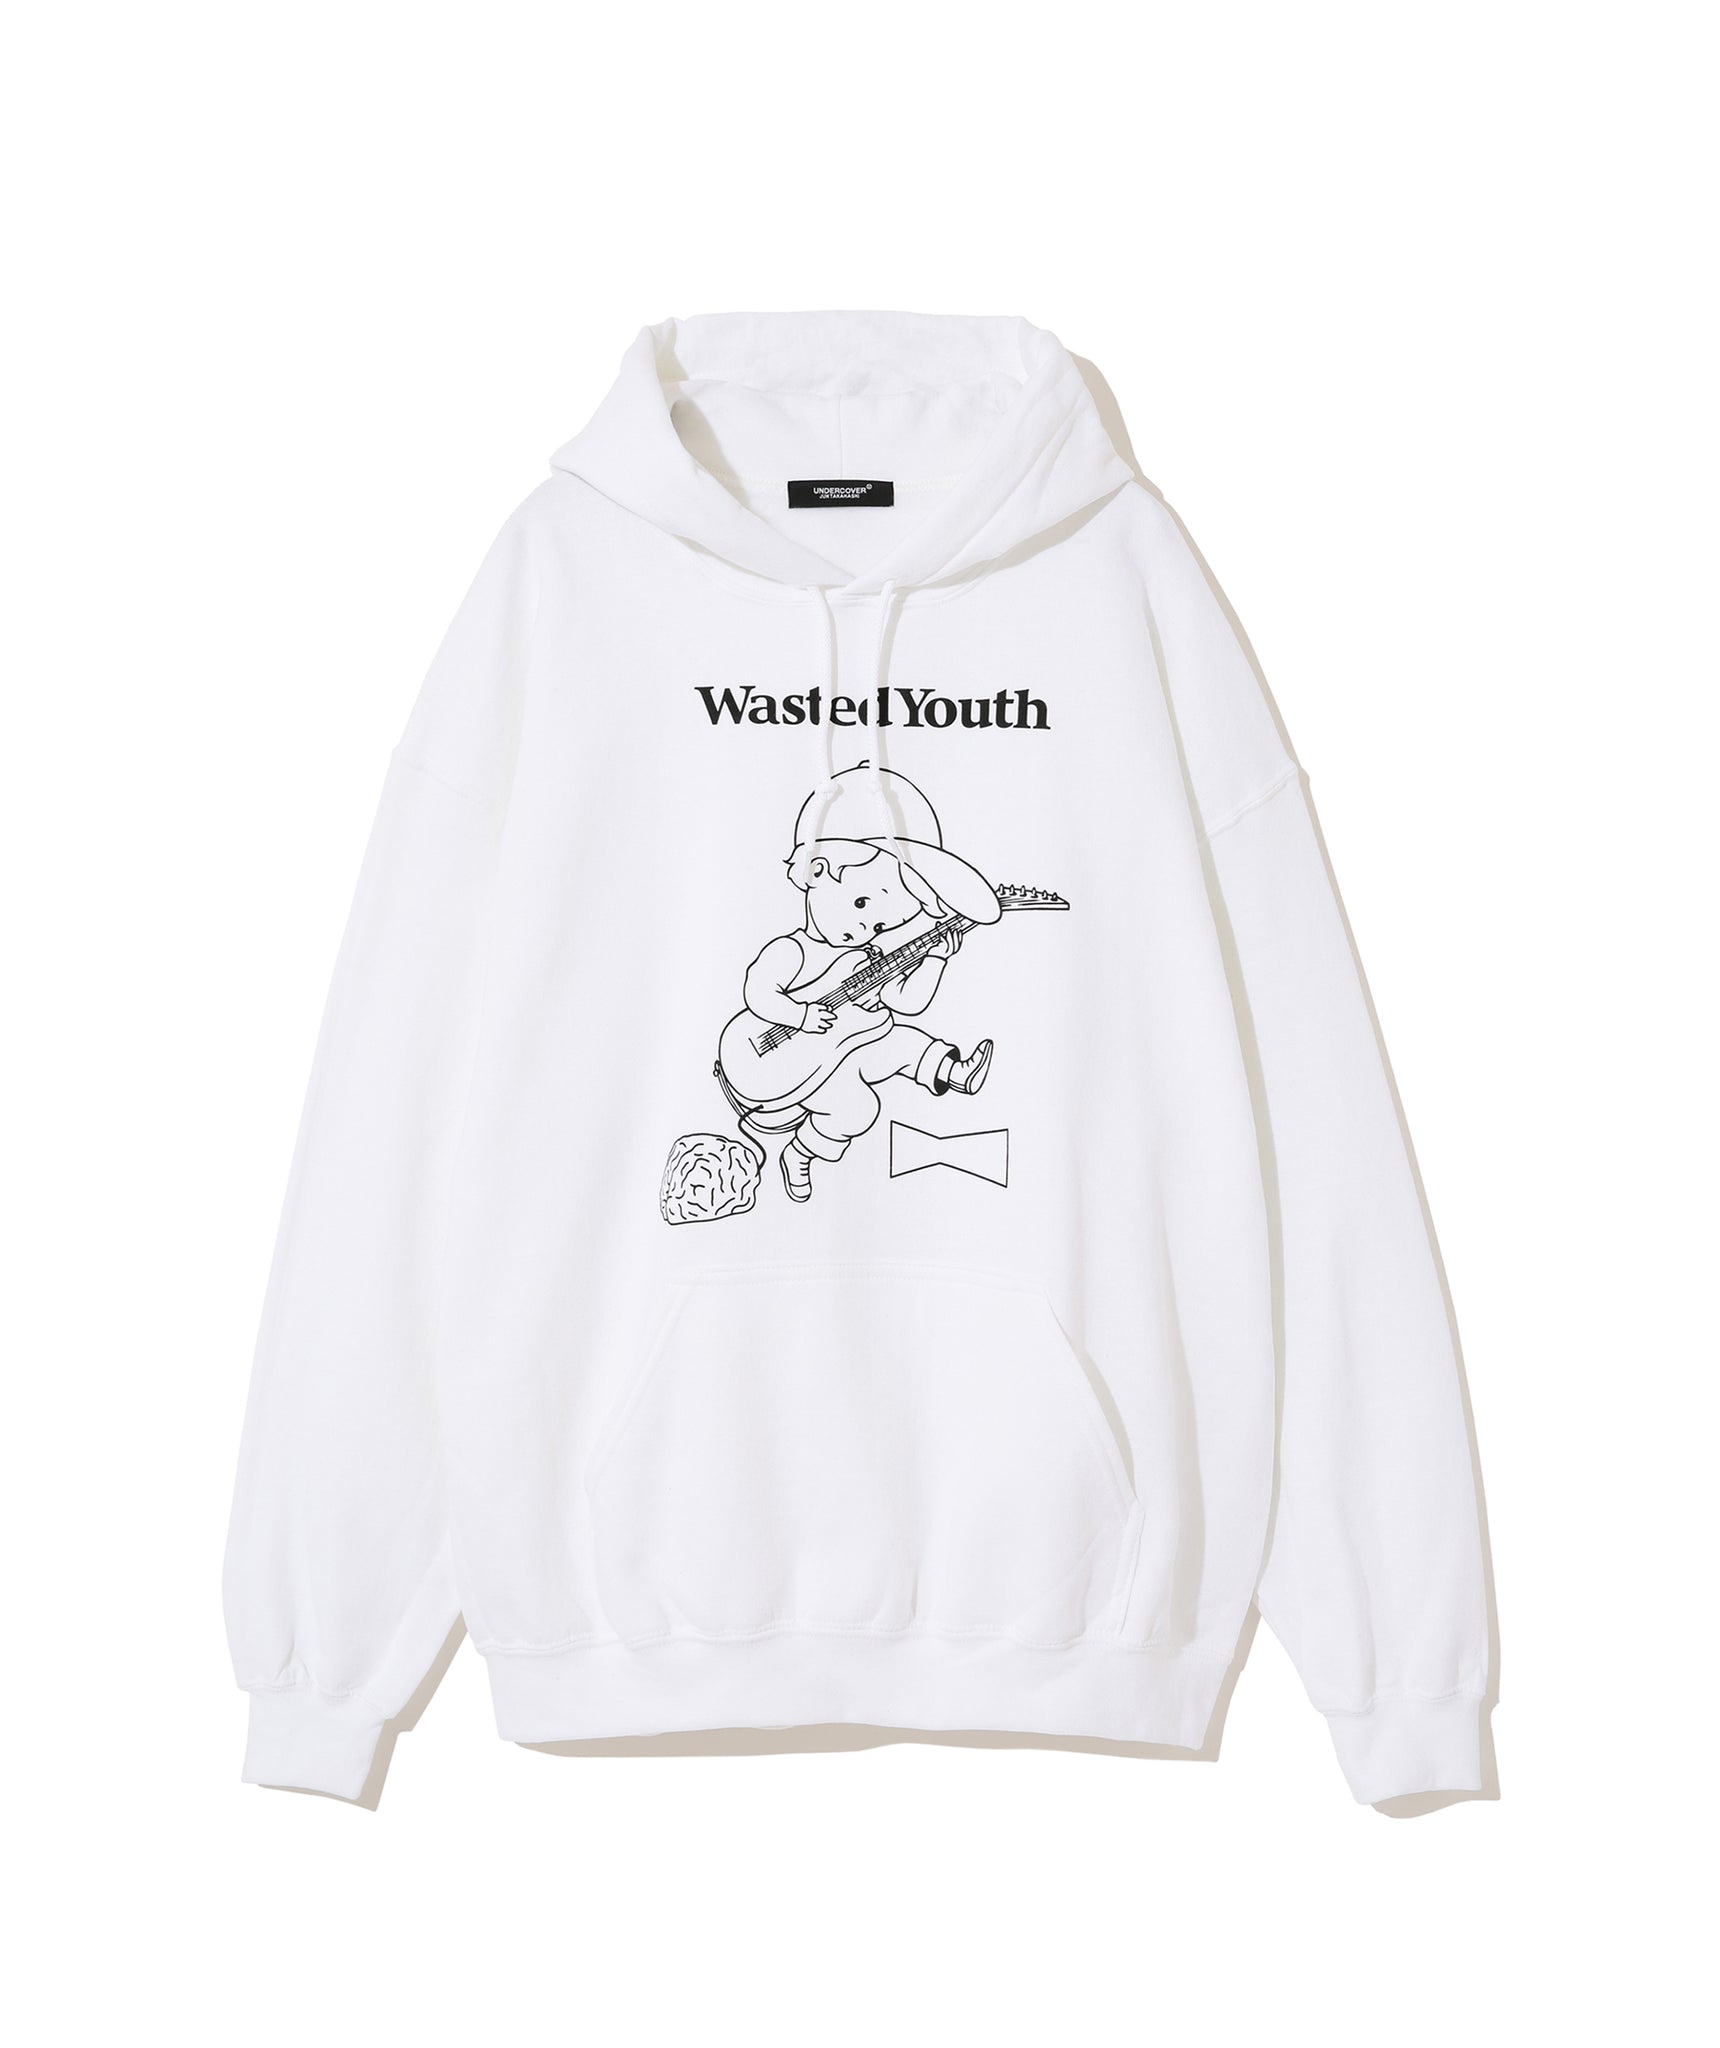 UNDERCOVER × VERDY   Wasted Youthコラボパーカー裏起毛あり